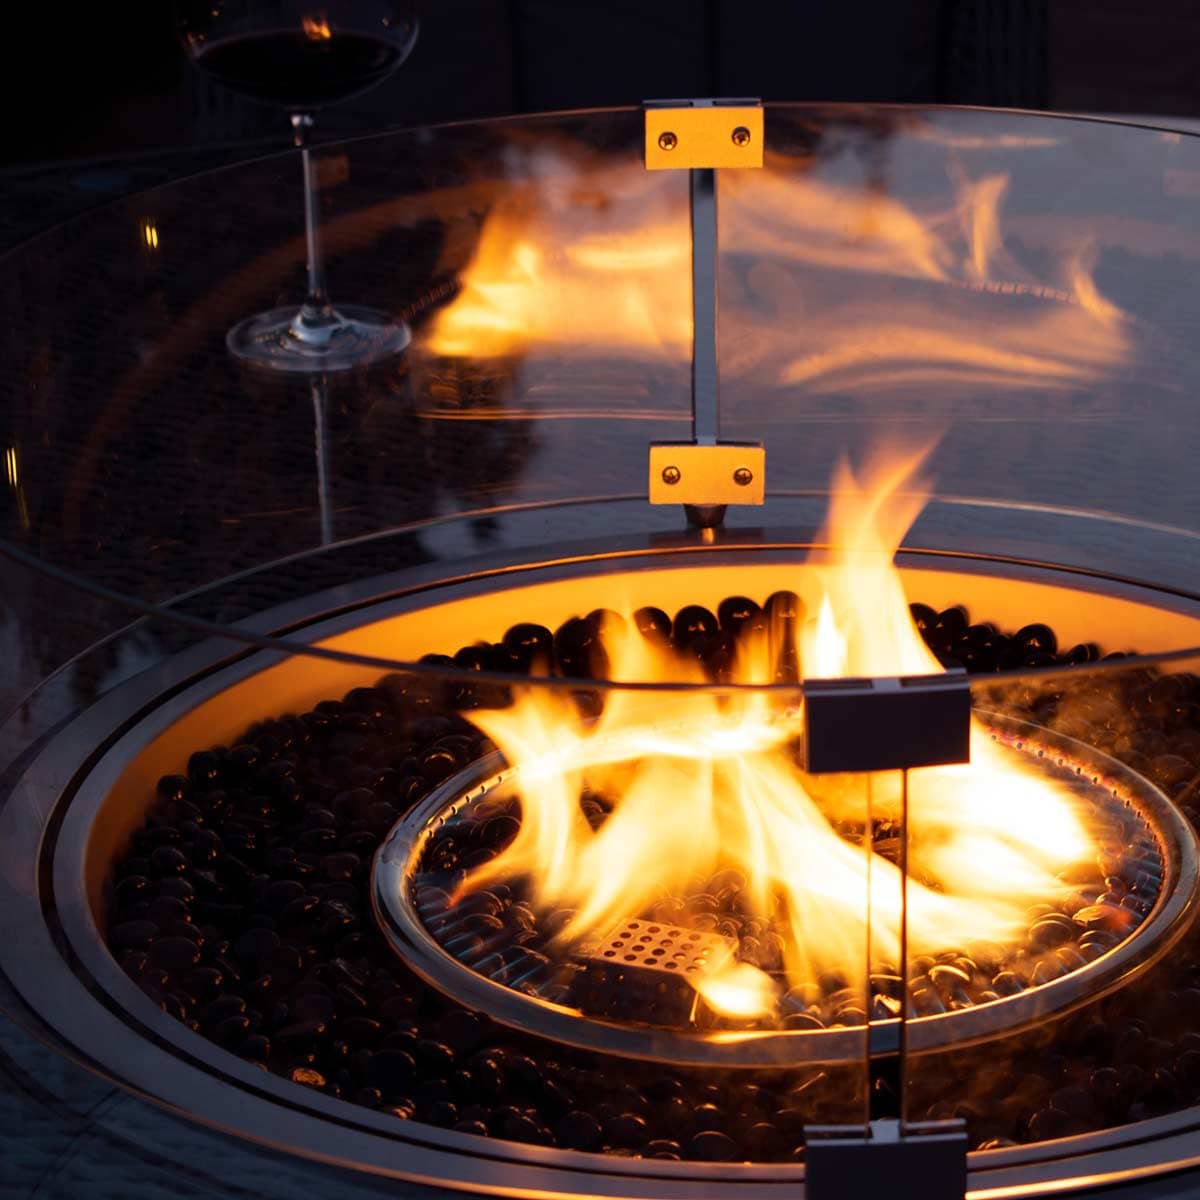 Close up of the fire pit and round glass surround